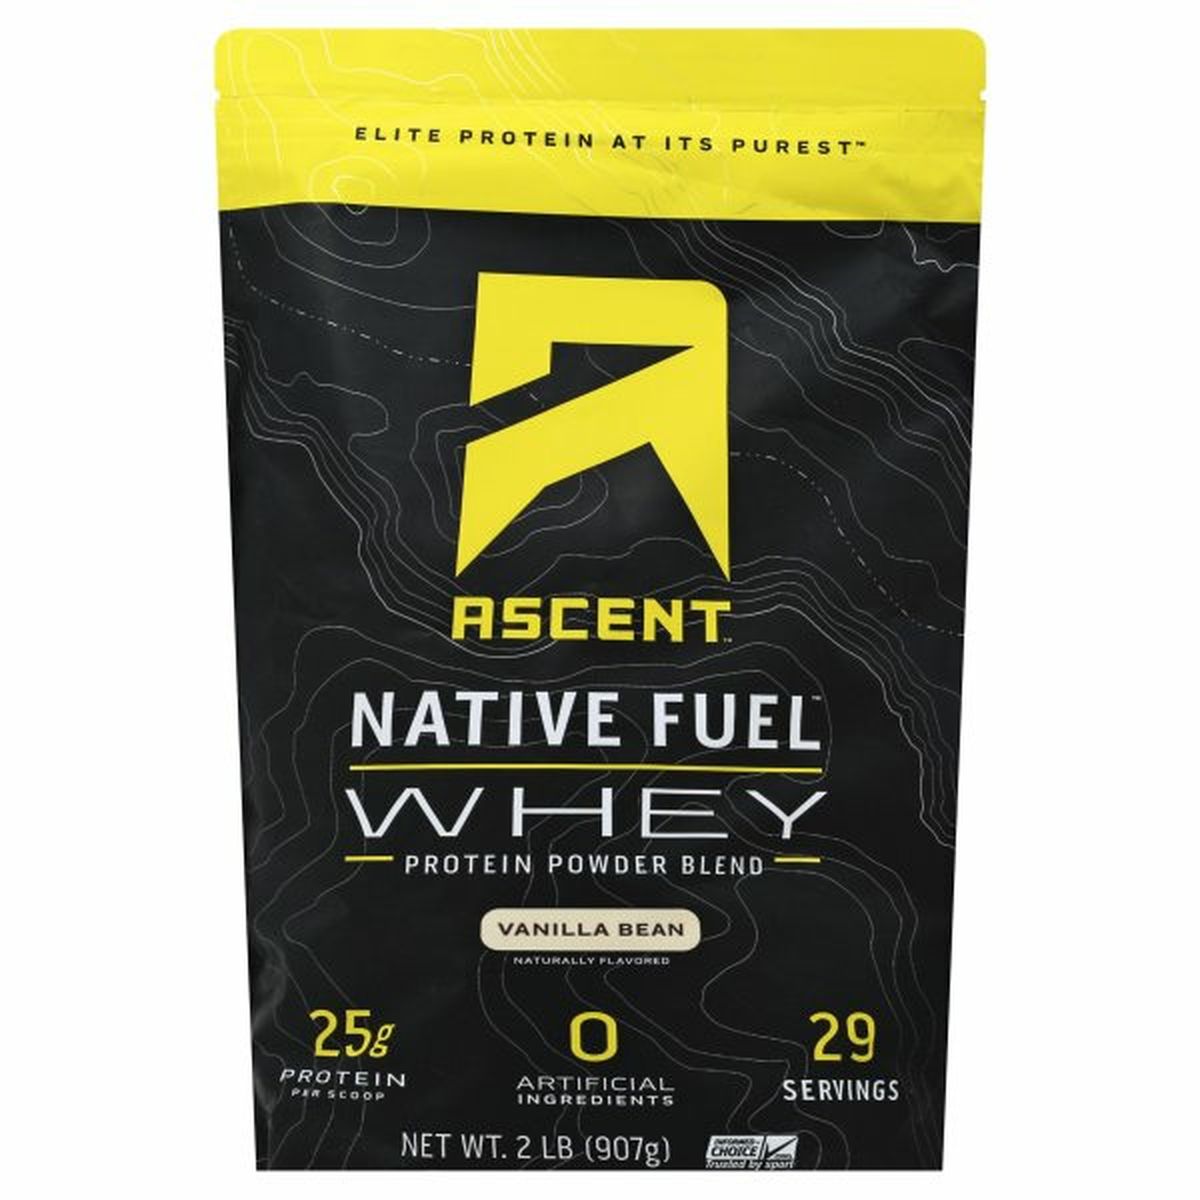 Calories in Ascent Native Fuel Protein Powder Blend, Whey, Vanilla Bean